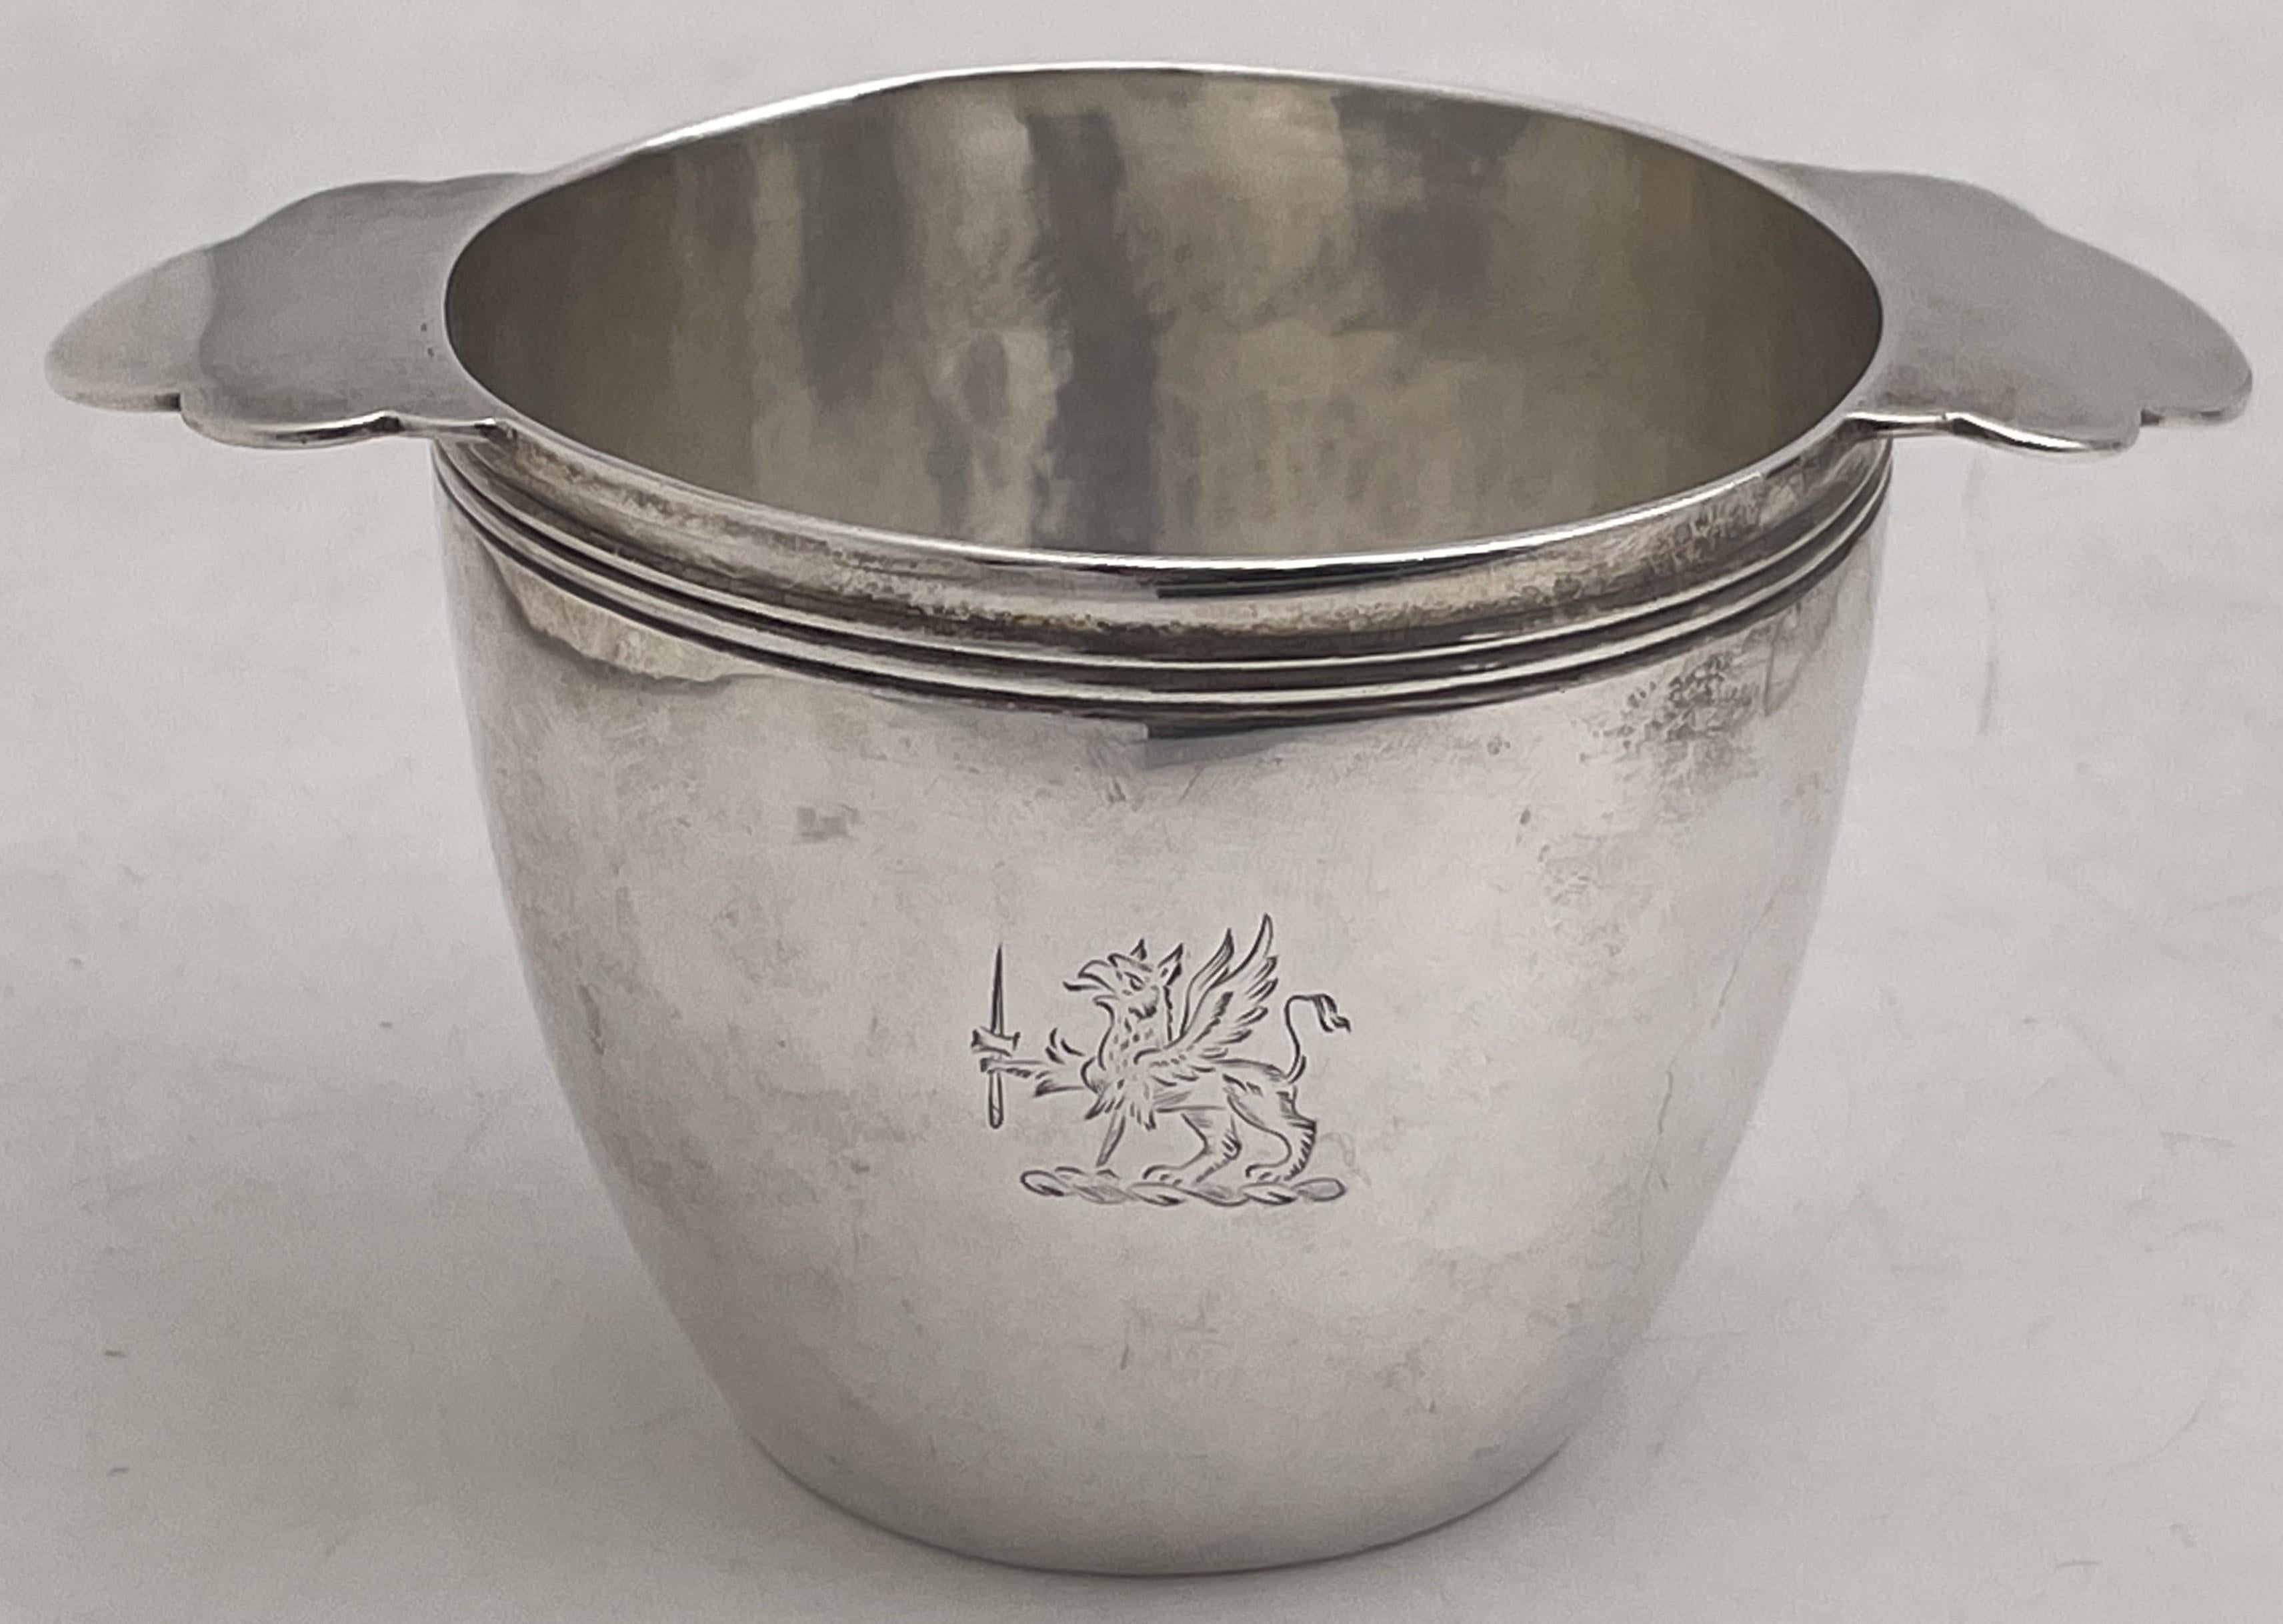 Thomas Heming set of 4 hand-beaten sterling silver quaich cups, made in London, England, in 1801 (Georgian era), adorned with an engraved crest and with 2 handles. They measure 4'' from handle to handle (2 2/3'' in diameter) by 2 1/3'' in height,